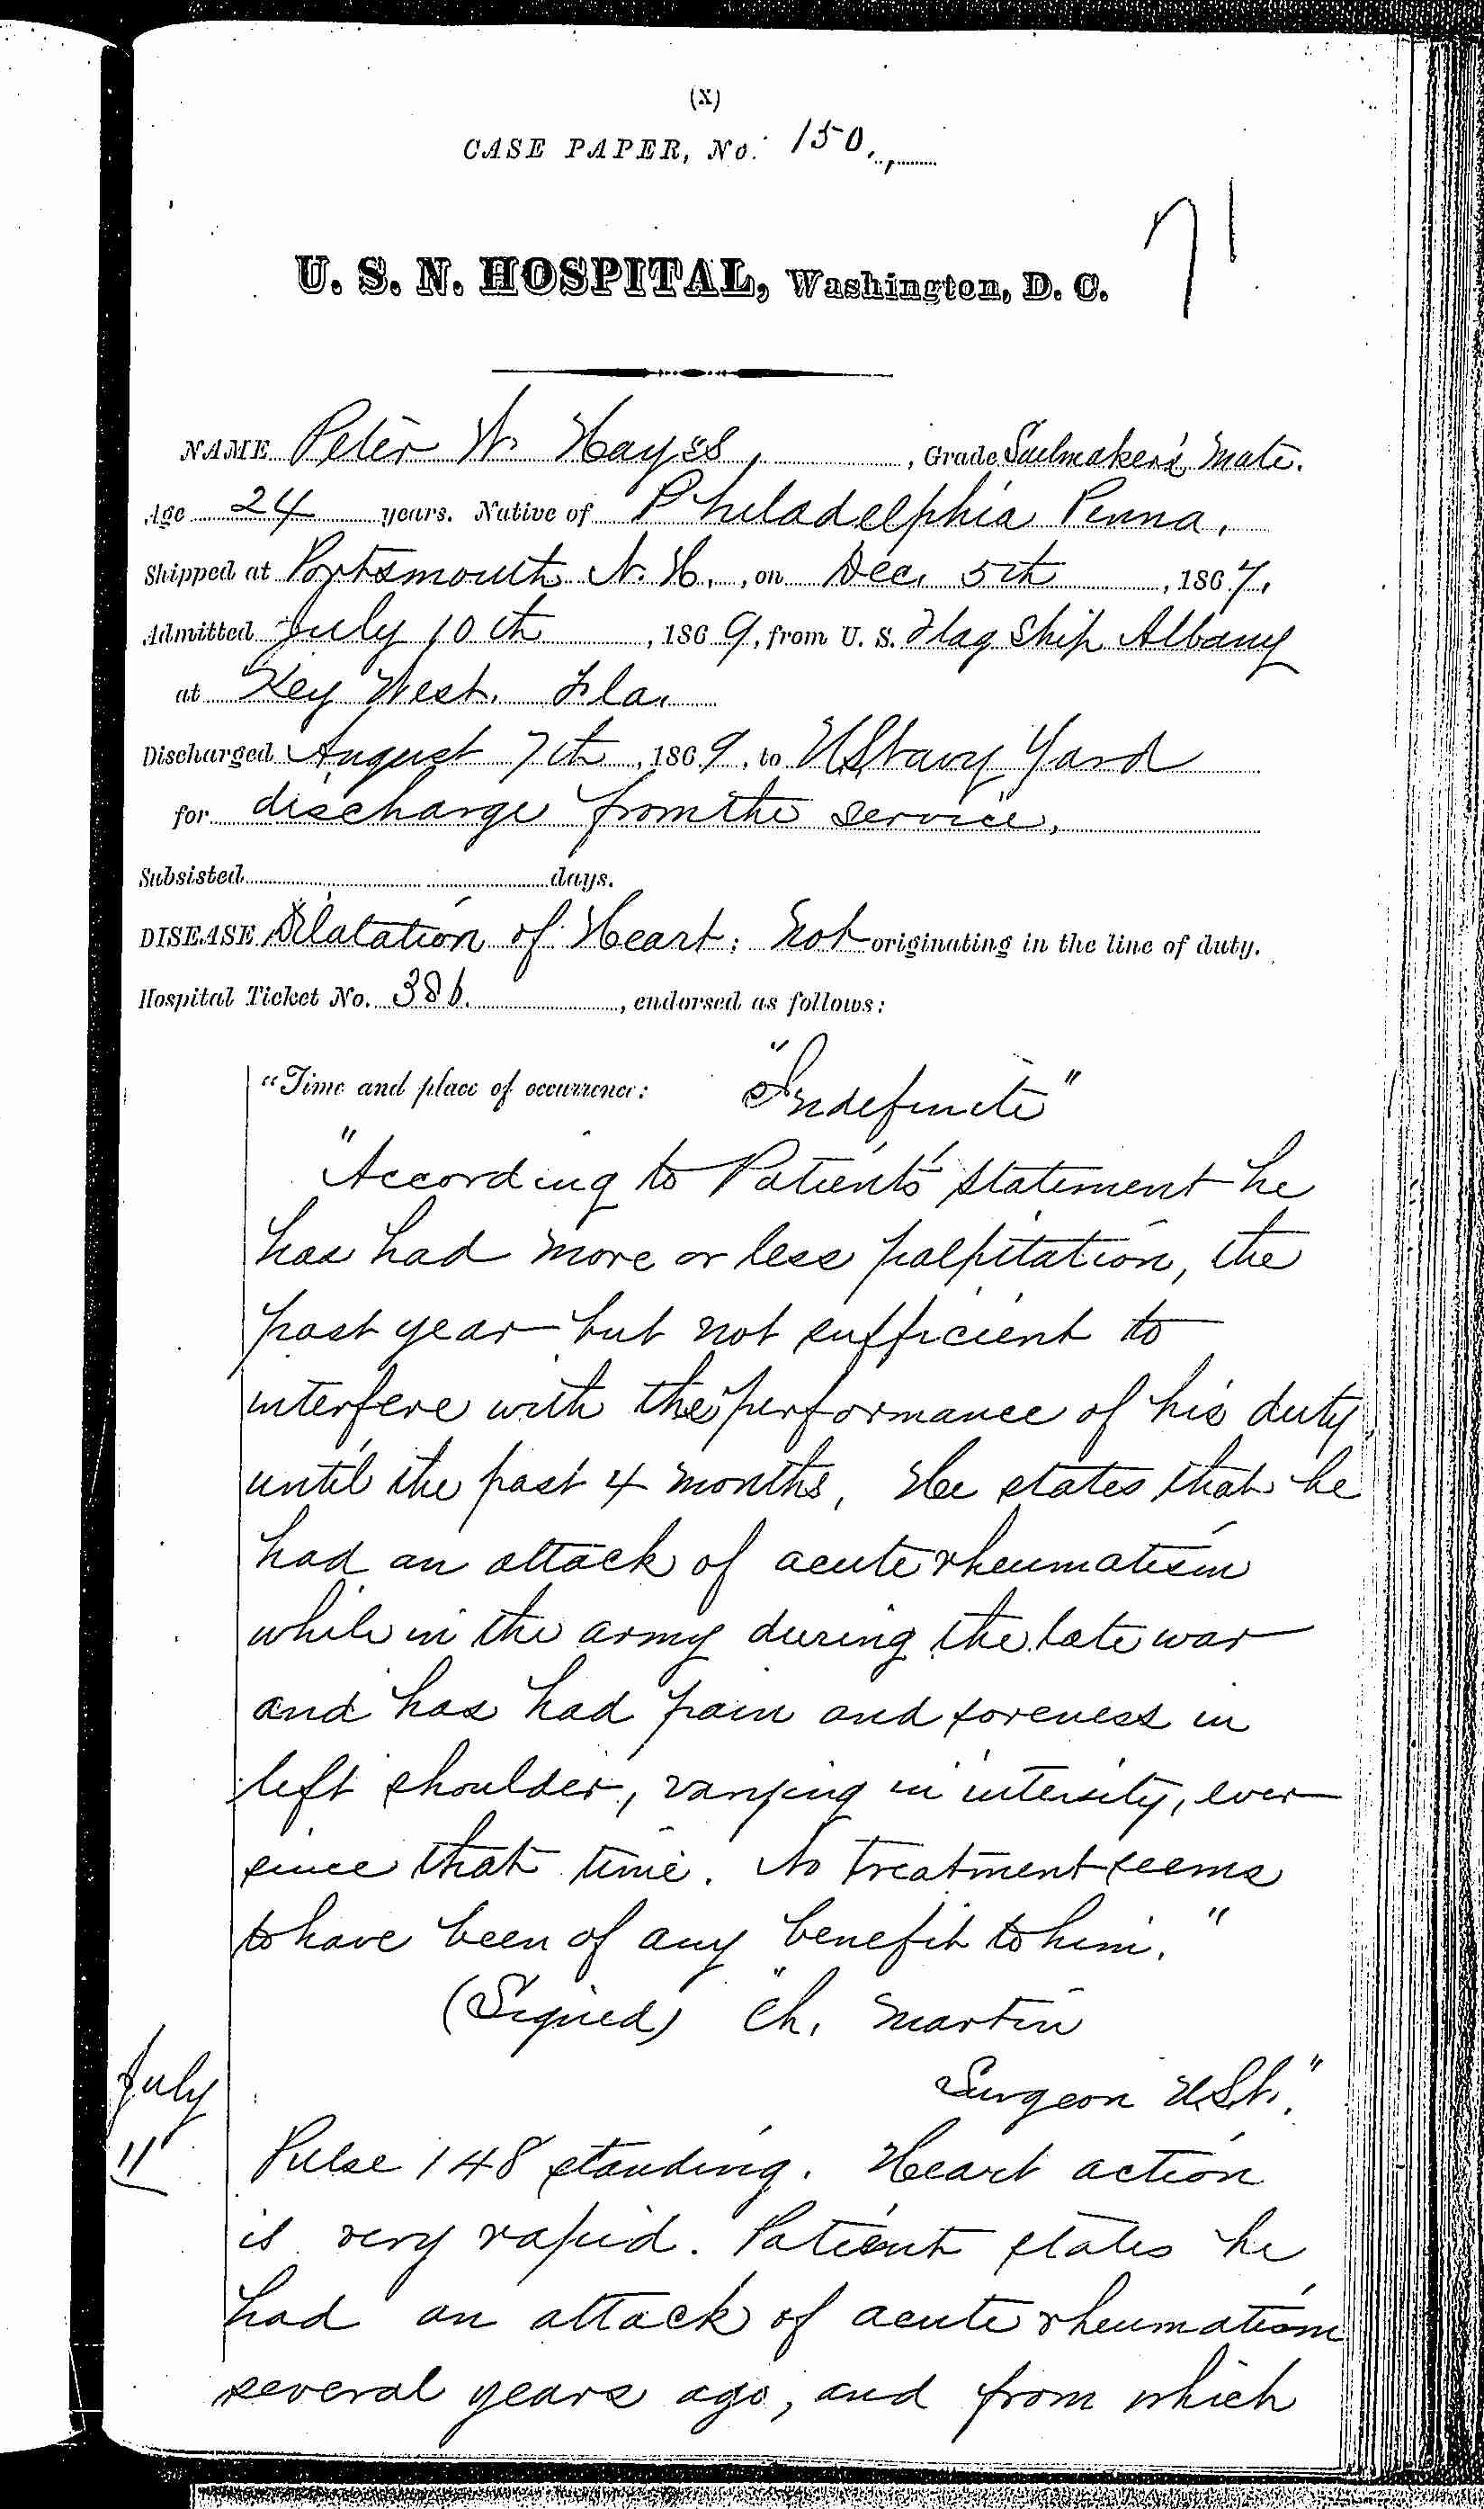 Entry for Peter W. Hayes (page 1 of 4) in the log Hospital Tickets and Case Papers - Naval Hospital - Washington, D.C. - 1868-69